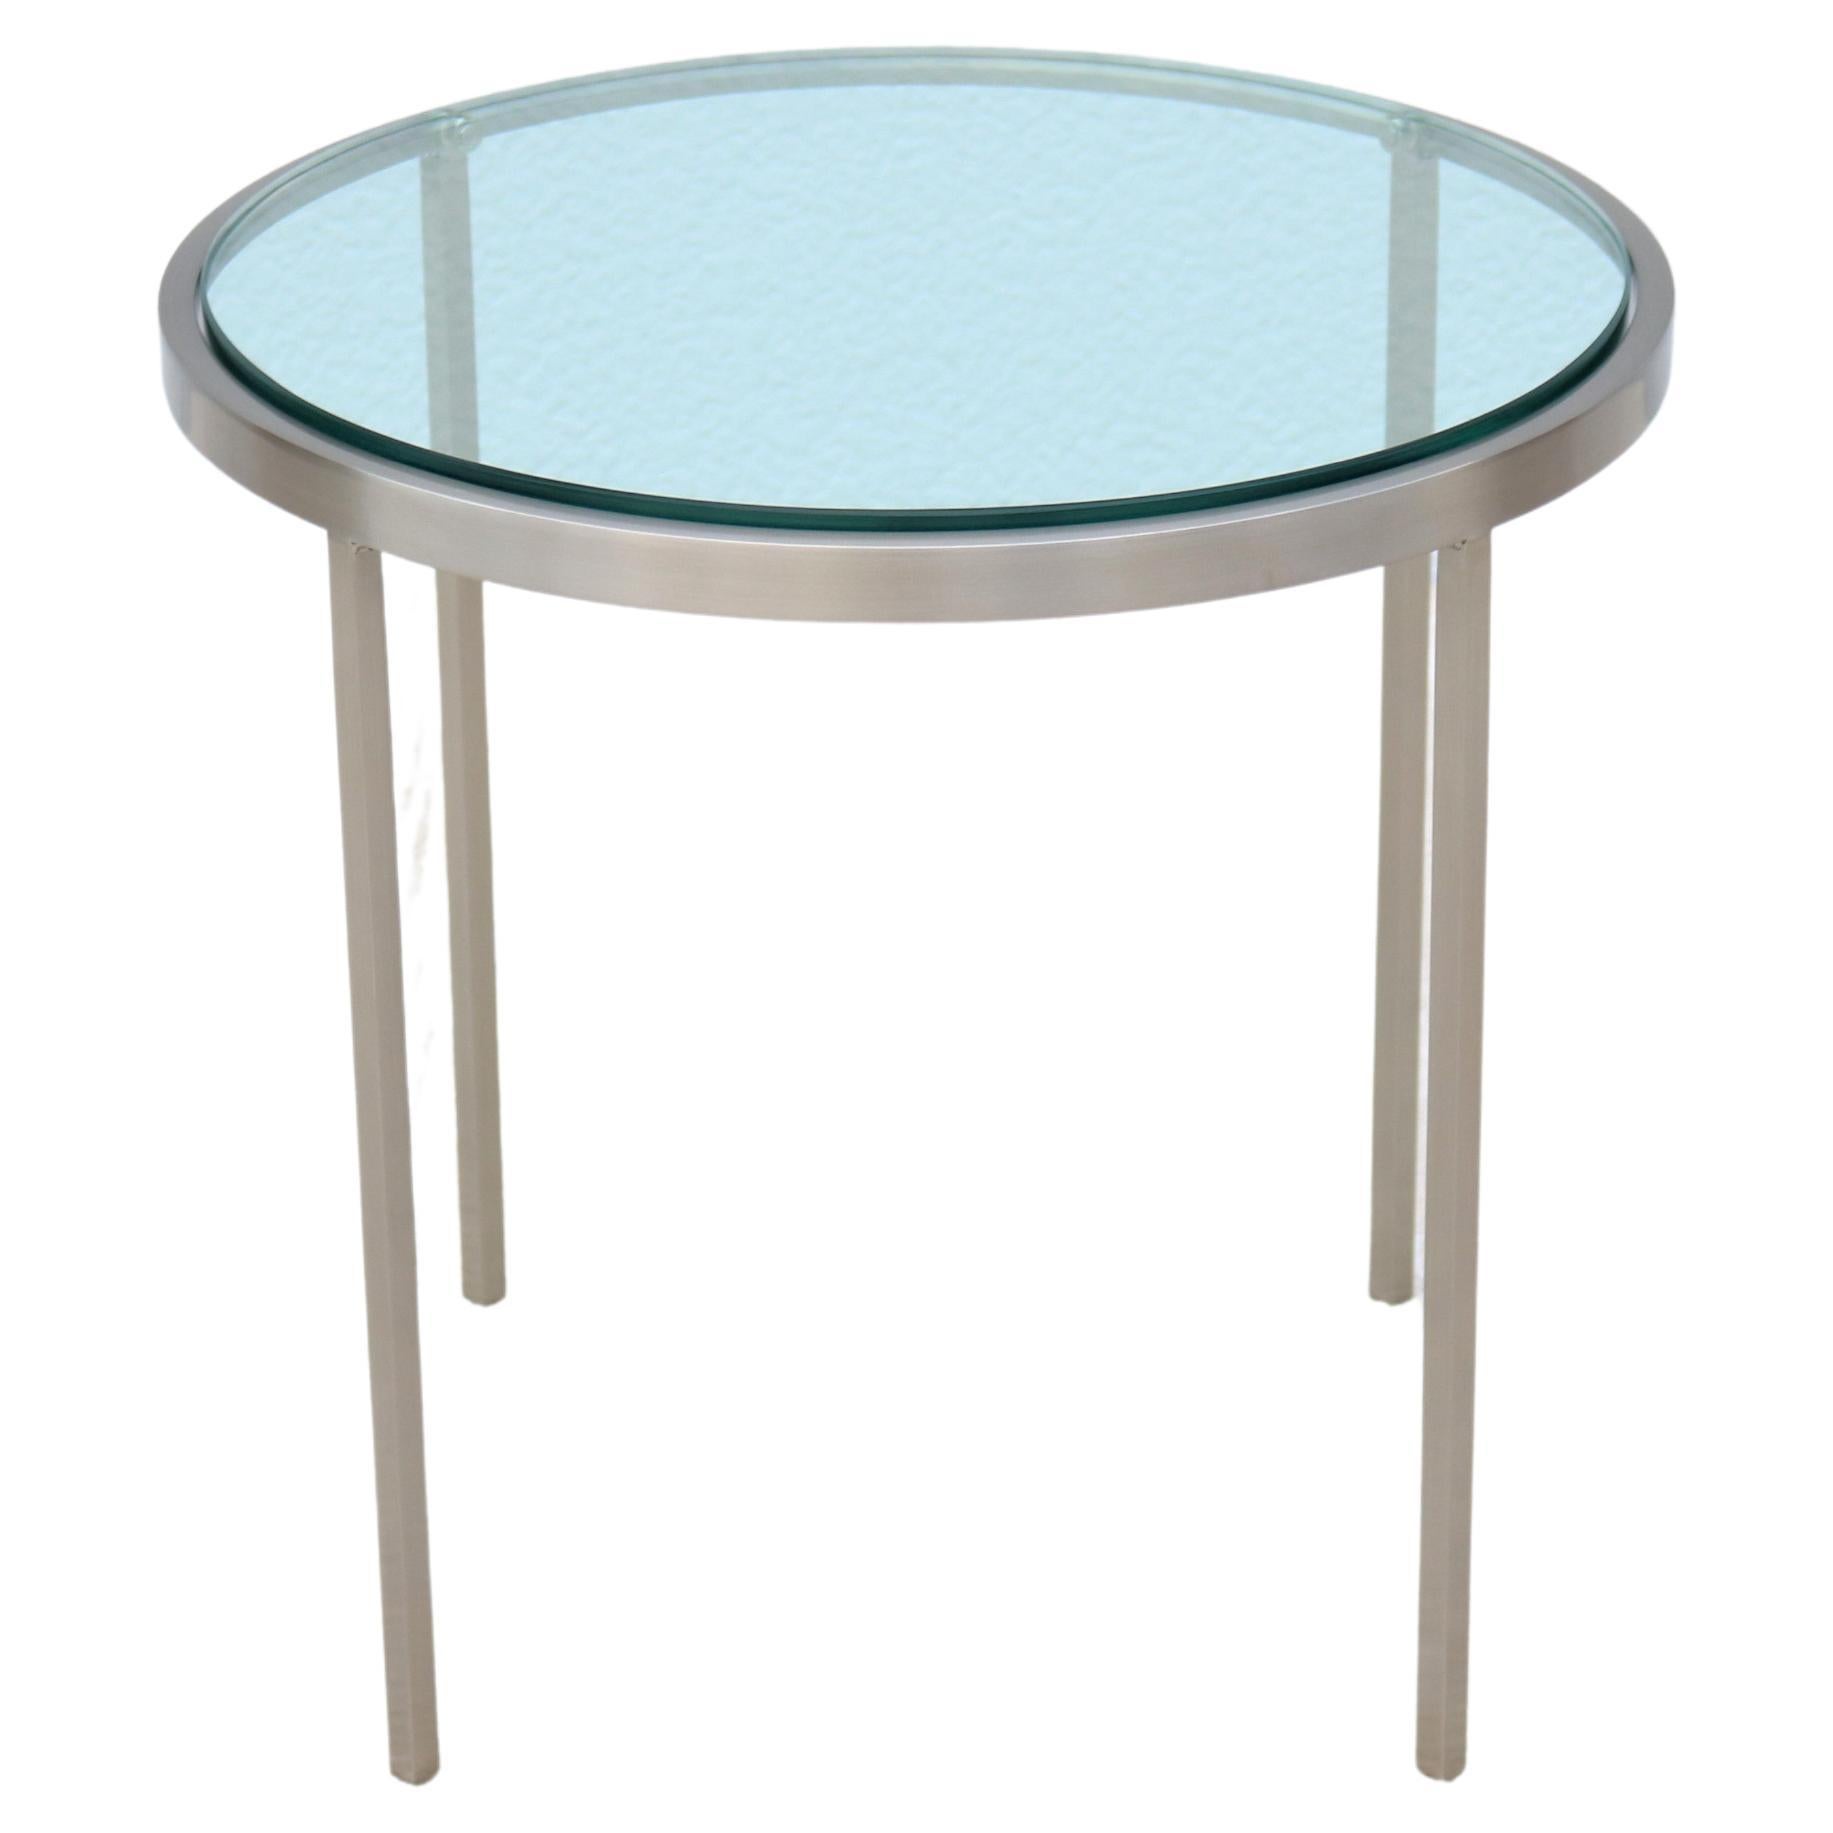 Mid-Century Modern Milo Baughman Round Glass and Stainless-Steel Side End Table For Sale